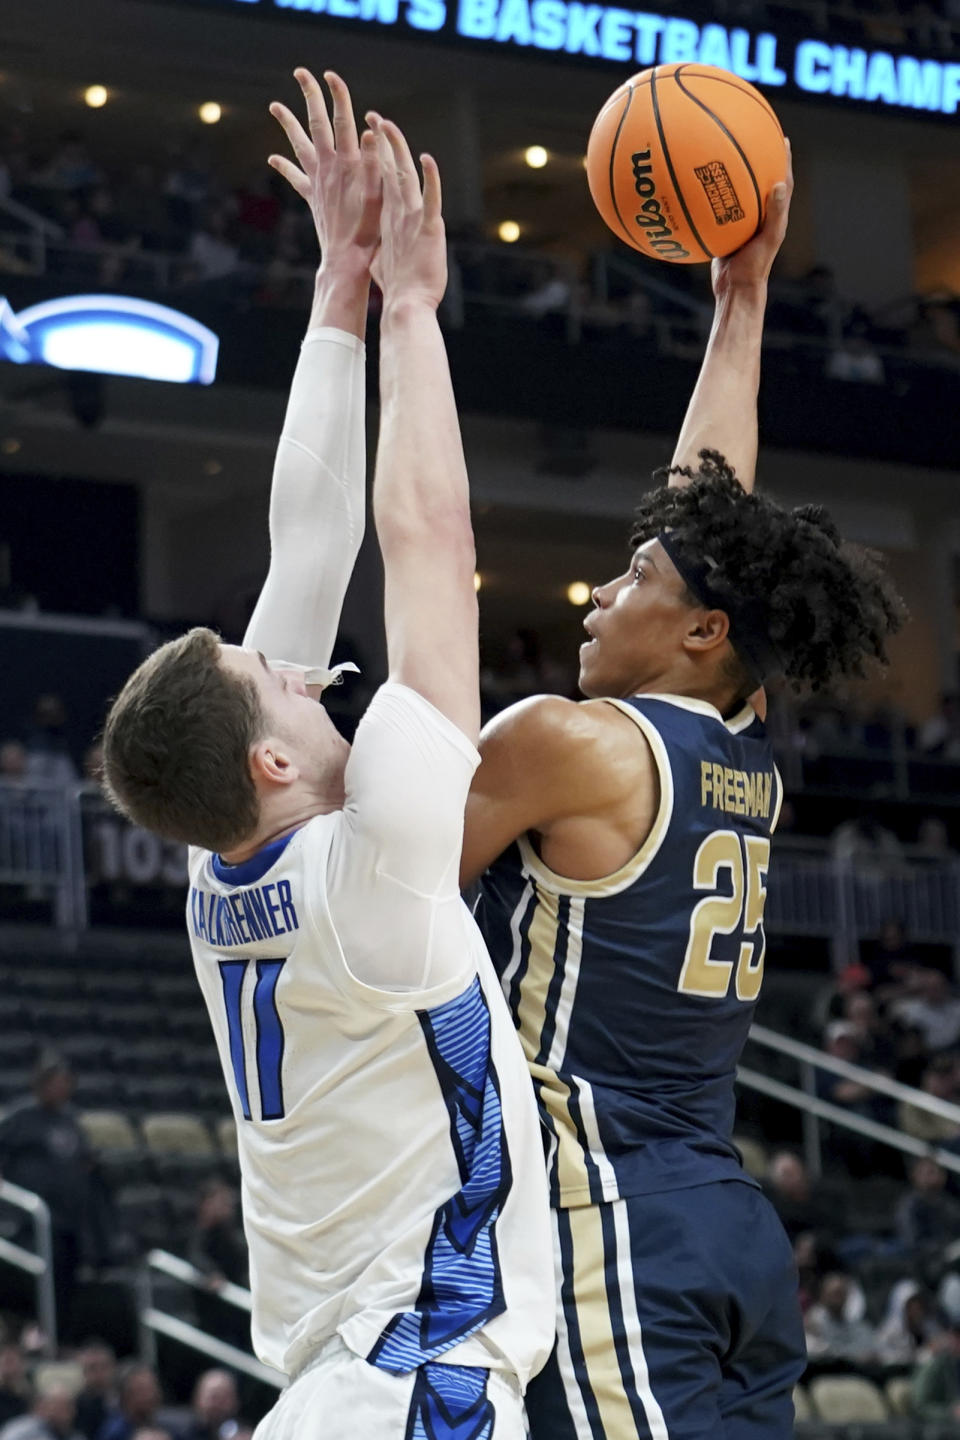 Akron's Enrique Freeman shoots against Creighton's Ryan Kalkbrenner during the first half of a college basketball game in the first round of the NCAA men's tournament Thursday, March 21, 2024, in Pittsburgh. (AP Photo/Matt Freed)